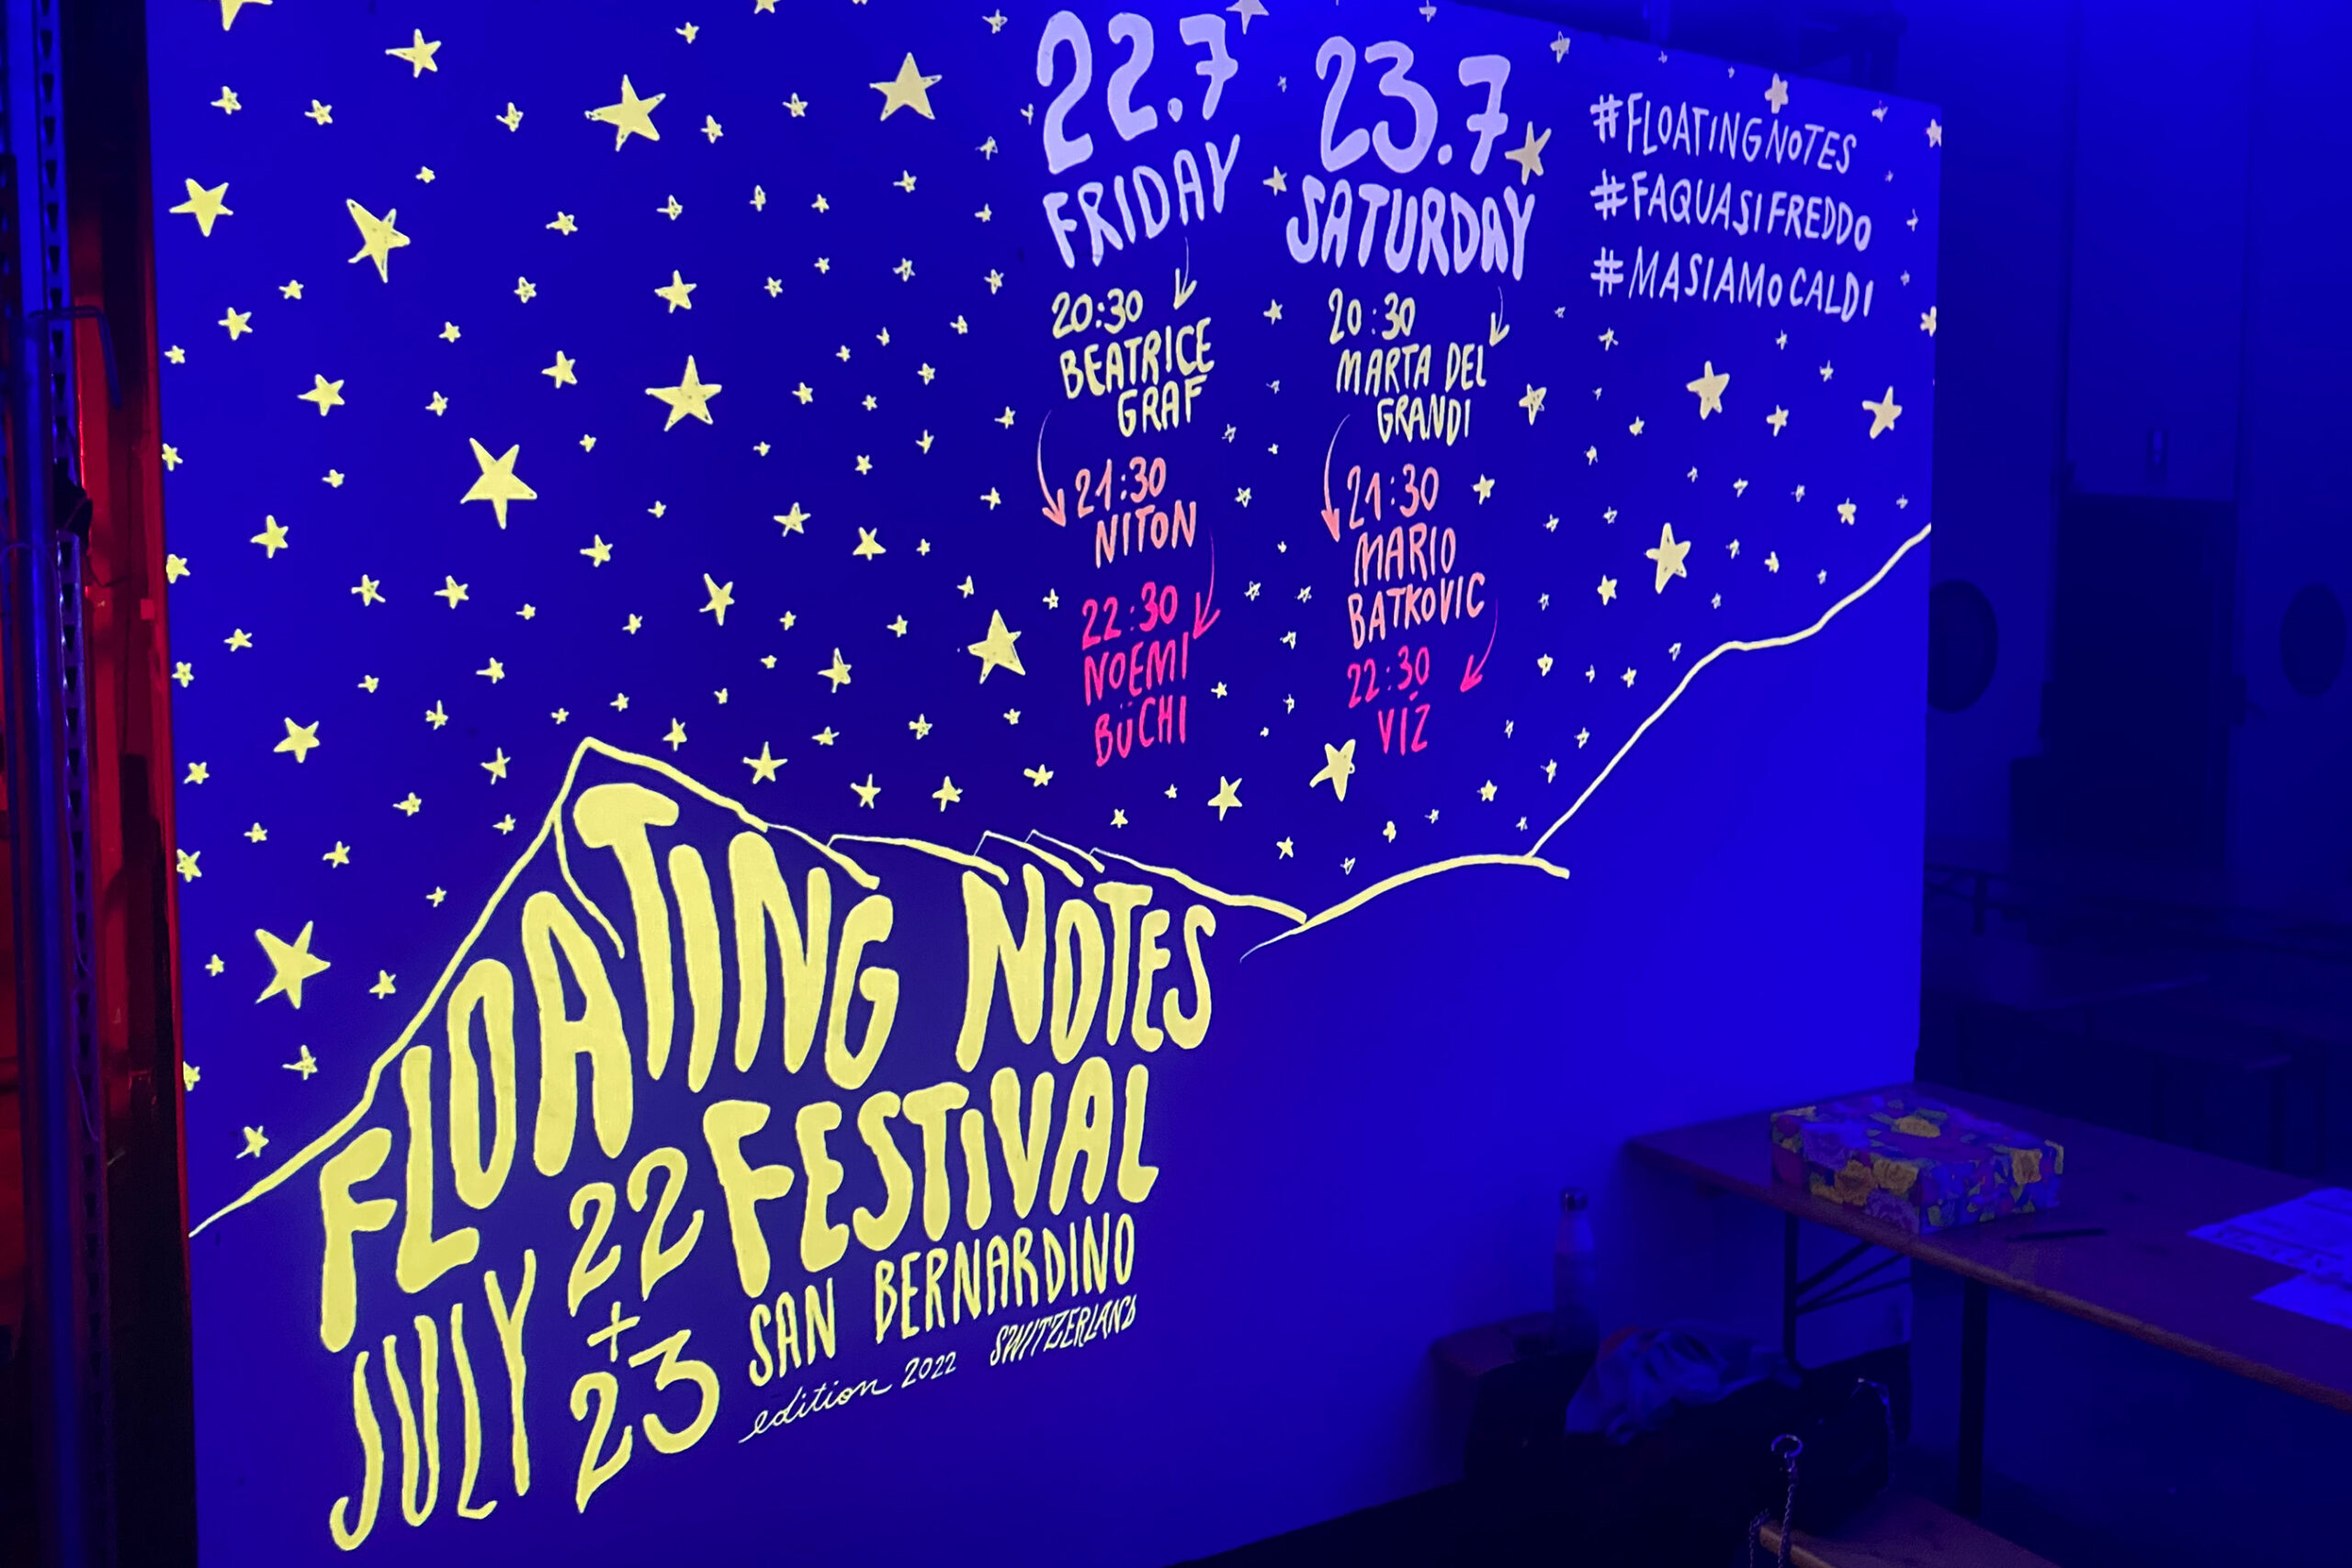 Floating Notes Festival: abseits des Mainstreams